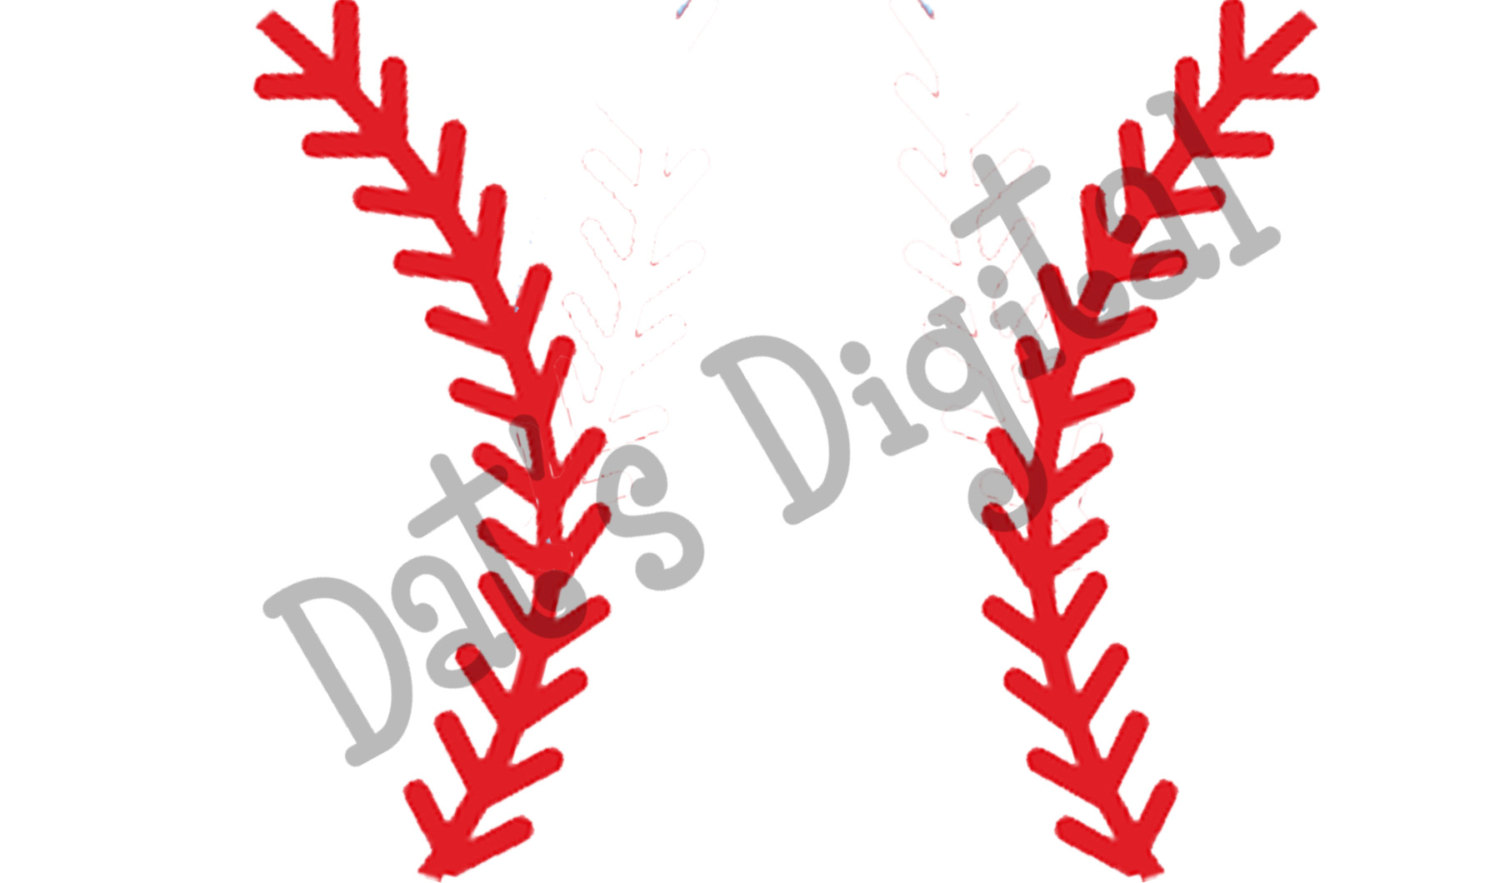 softball stitches clipart for silhouette - Clipground